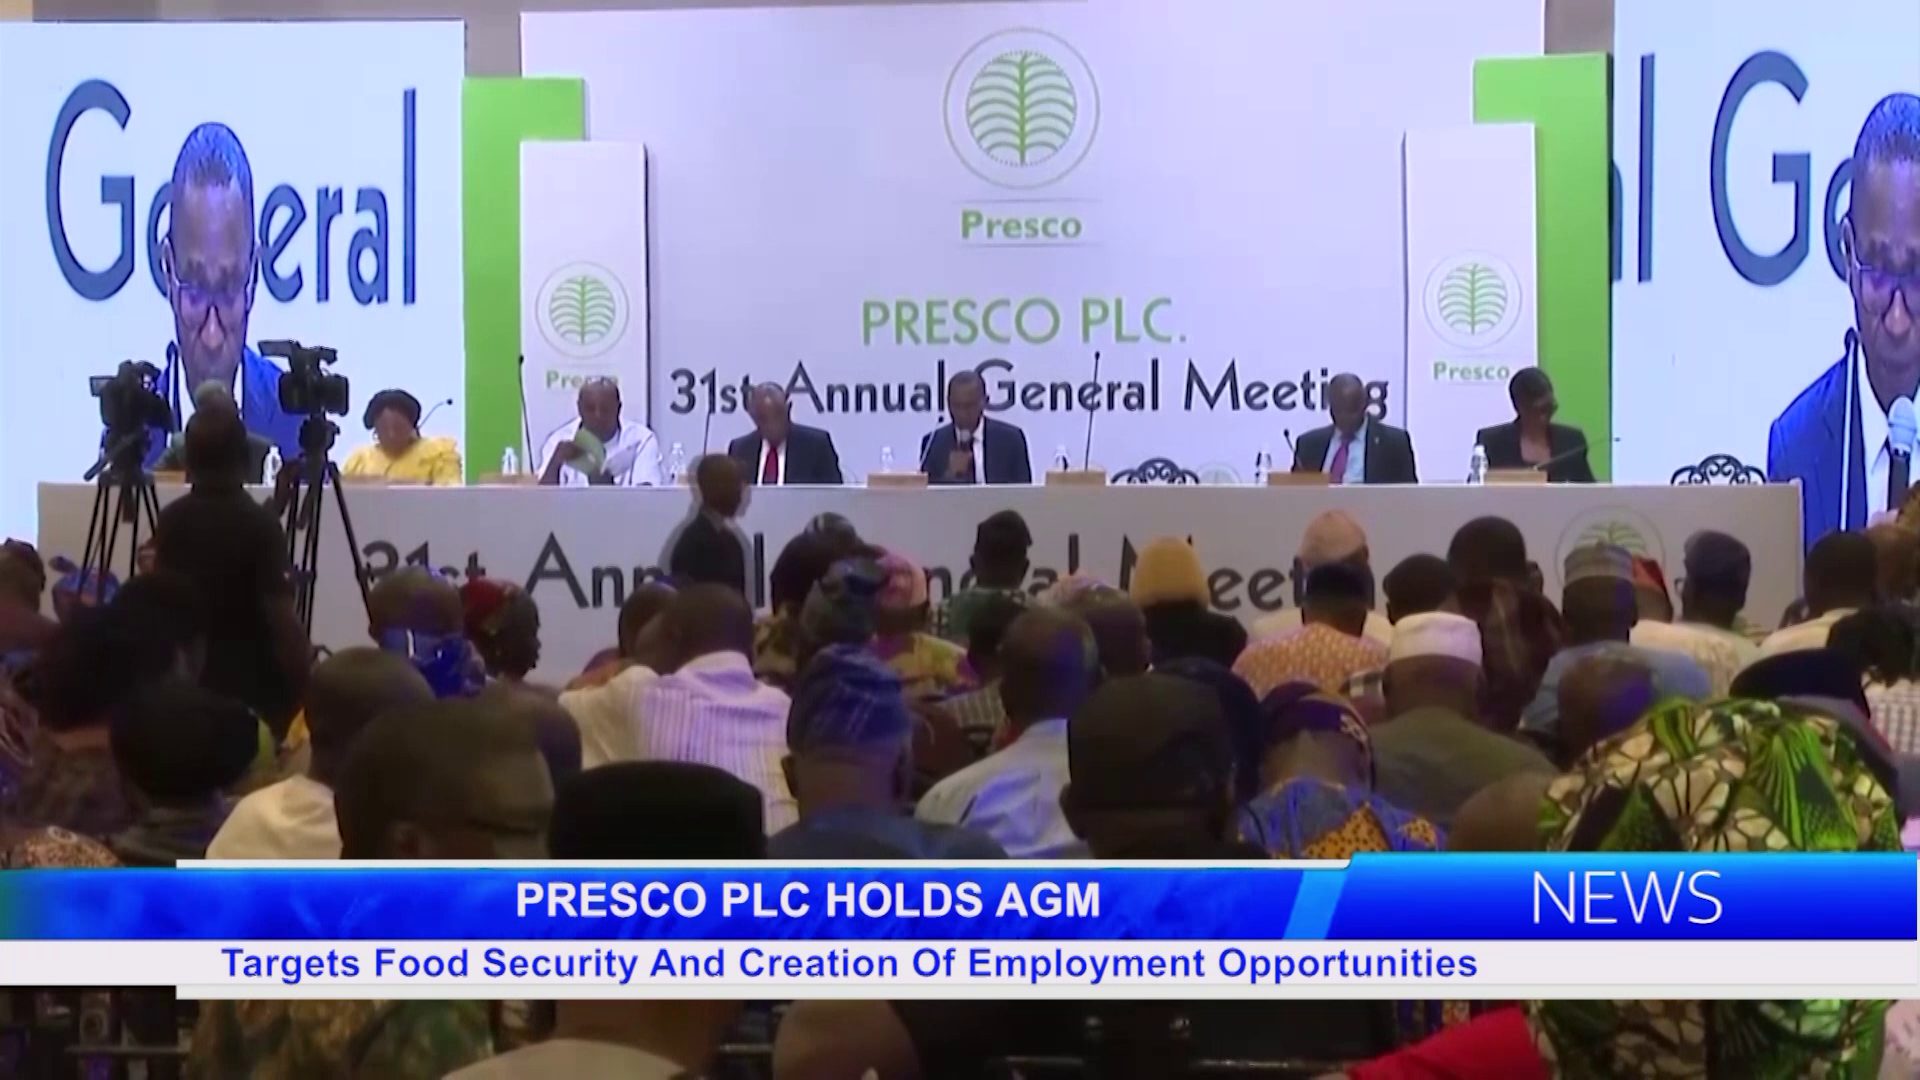 Presco PLC Holds AGM: Targets Food Security And Creation Of Employment Opportunities